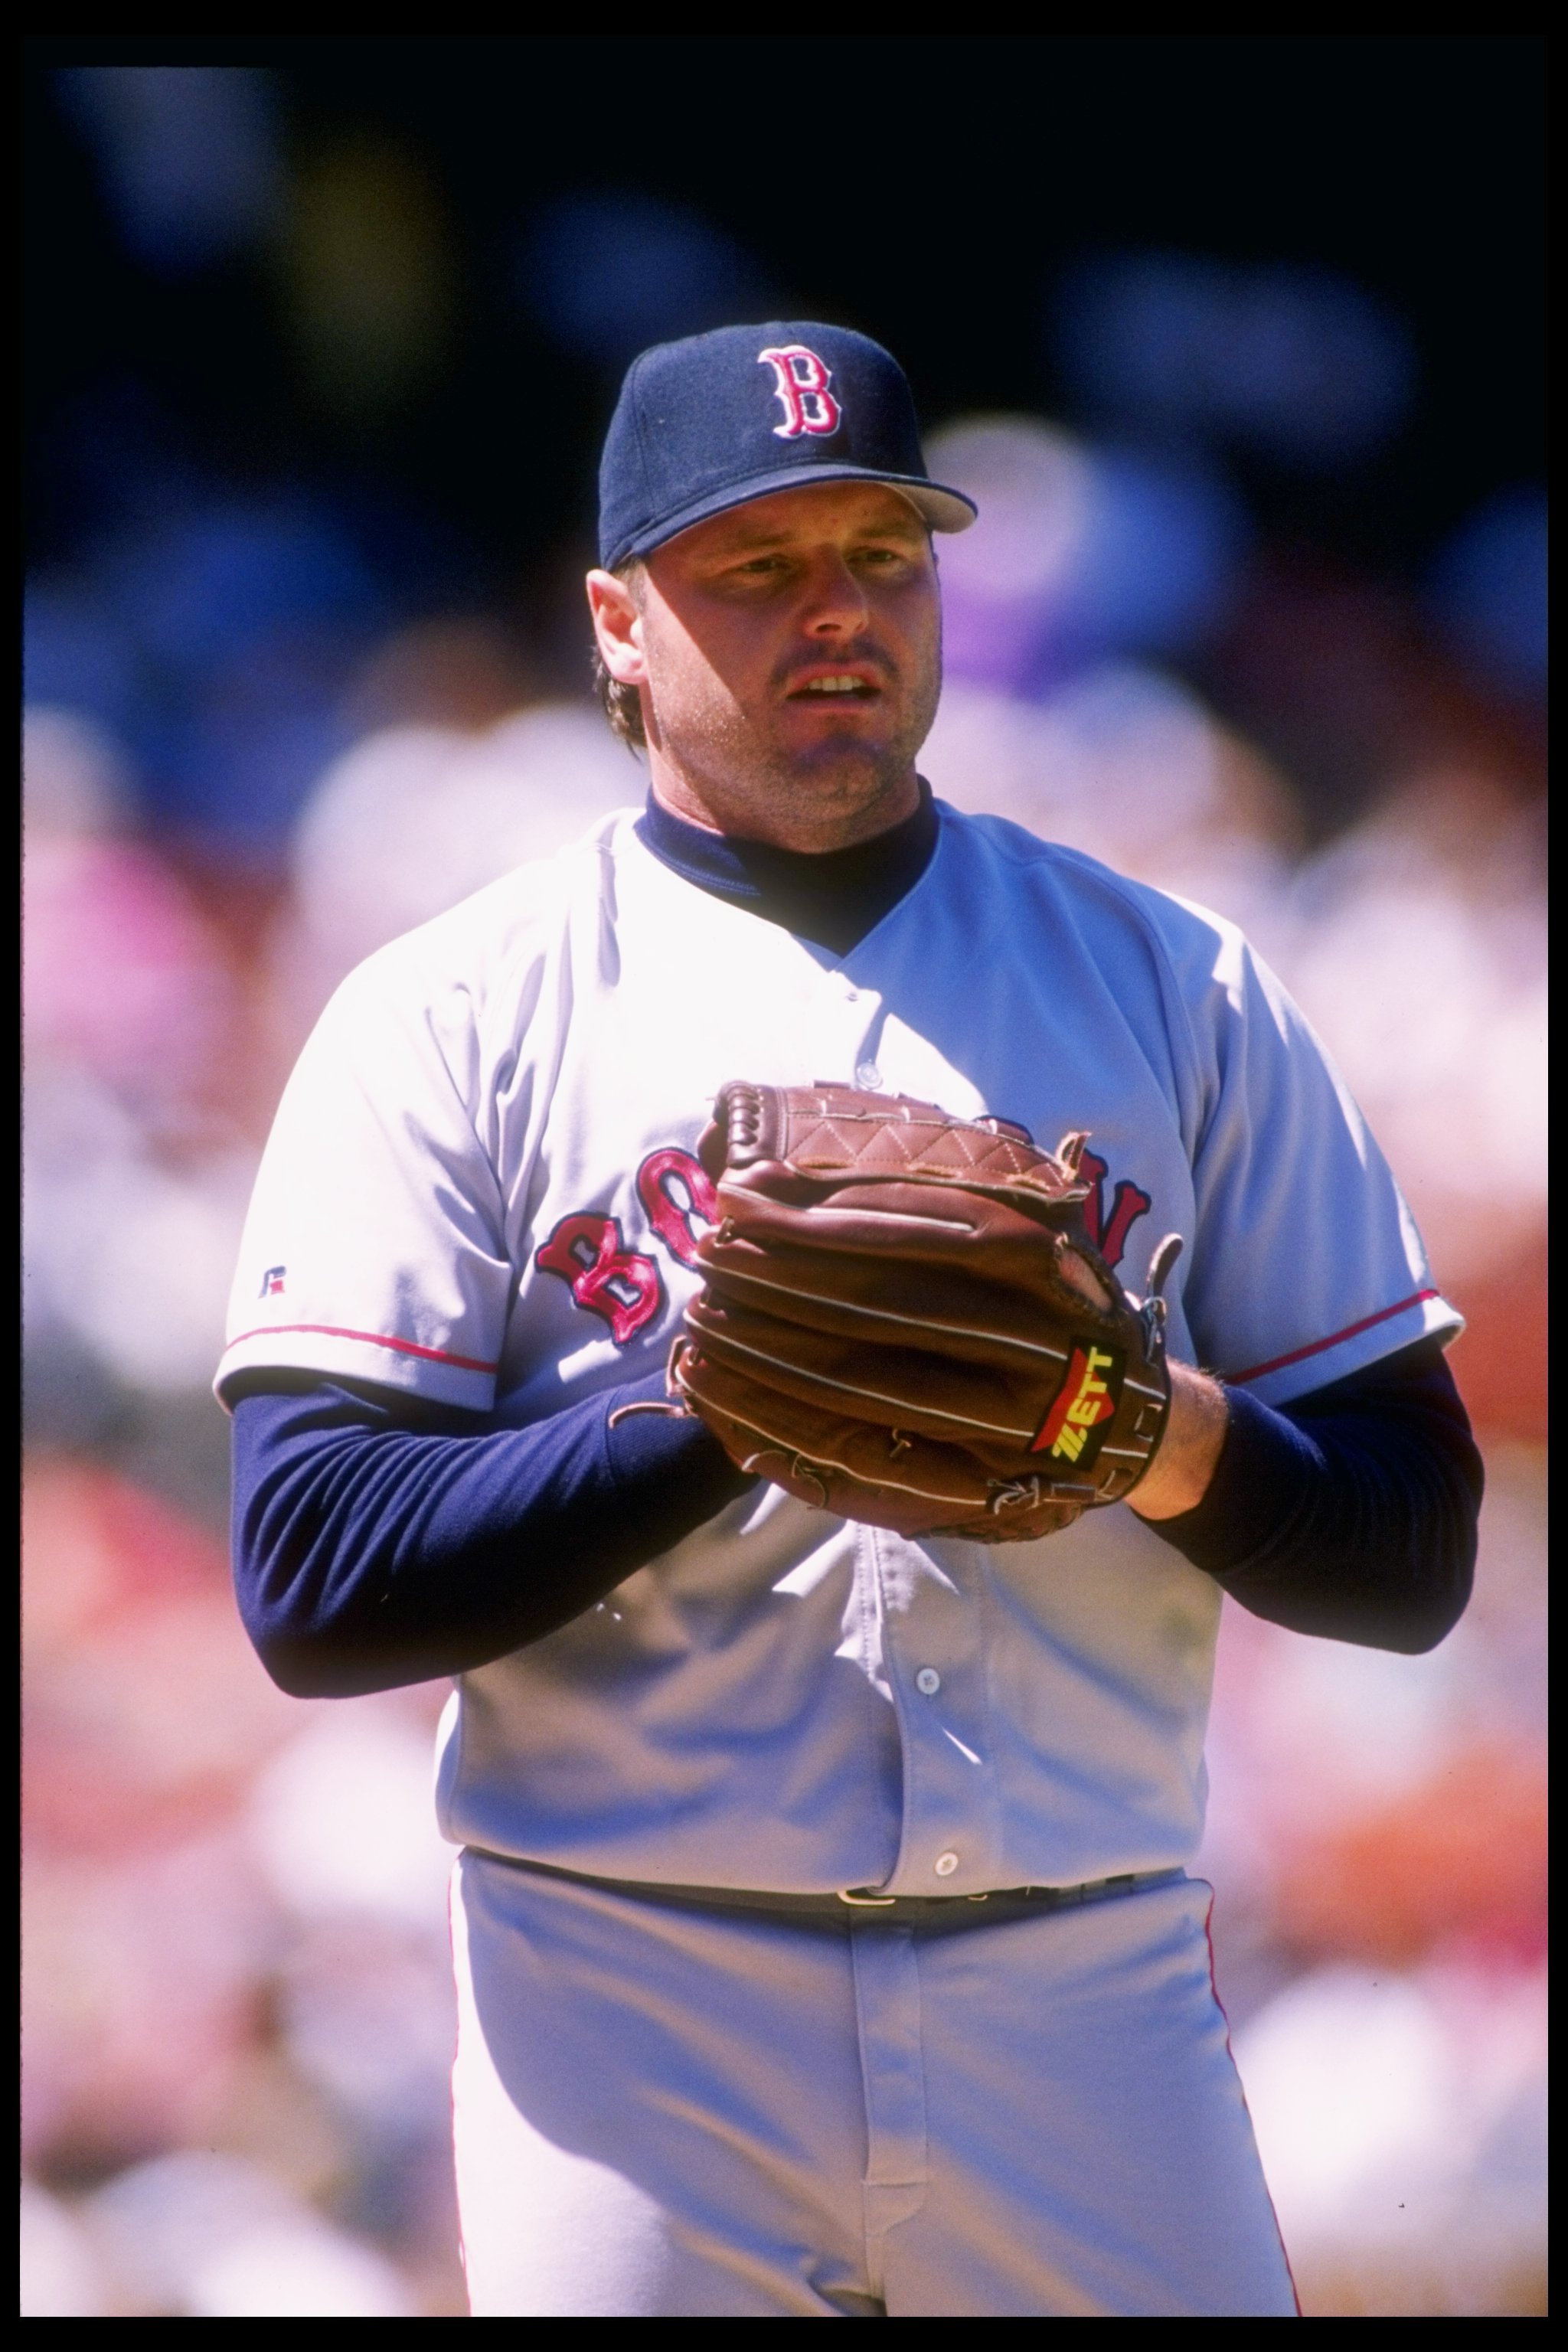 27 Aug 1995: Pitcher Roger Clemens of the Boston Red Sox looks on during a game against the Oakland Athletics at the Oakland Alameda Coliseum in Oakland, California. The Red Sox won the game 4-1.